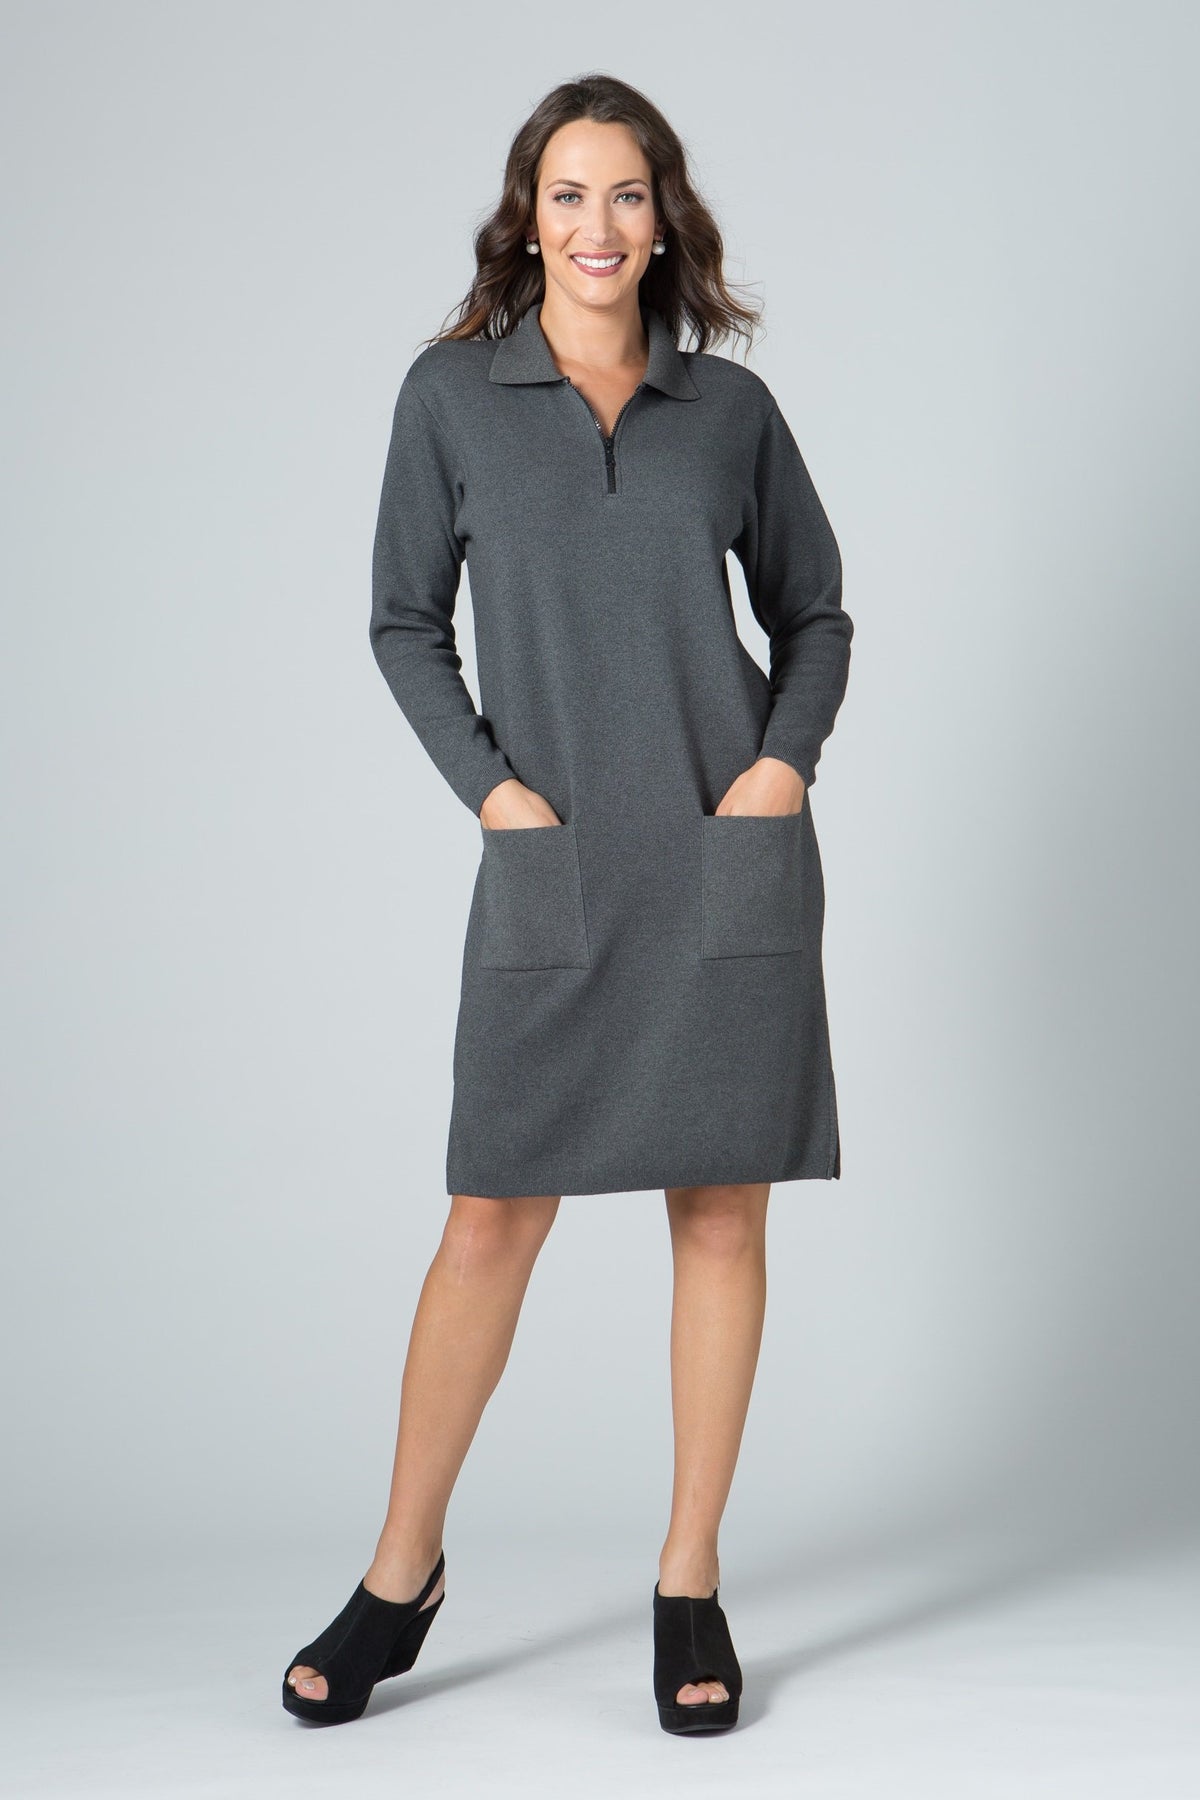 37” Long Sleeve Zip Polo Dress with Pockets New Orleans Knitwear